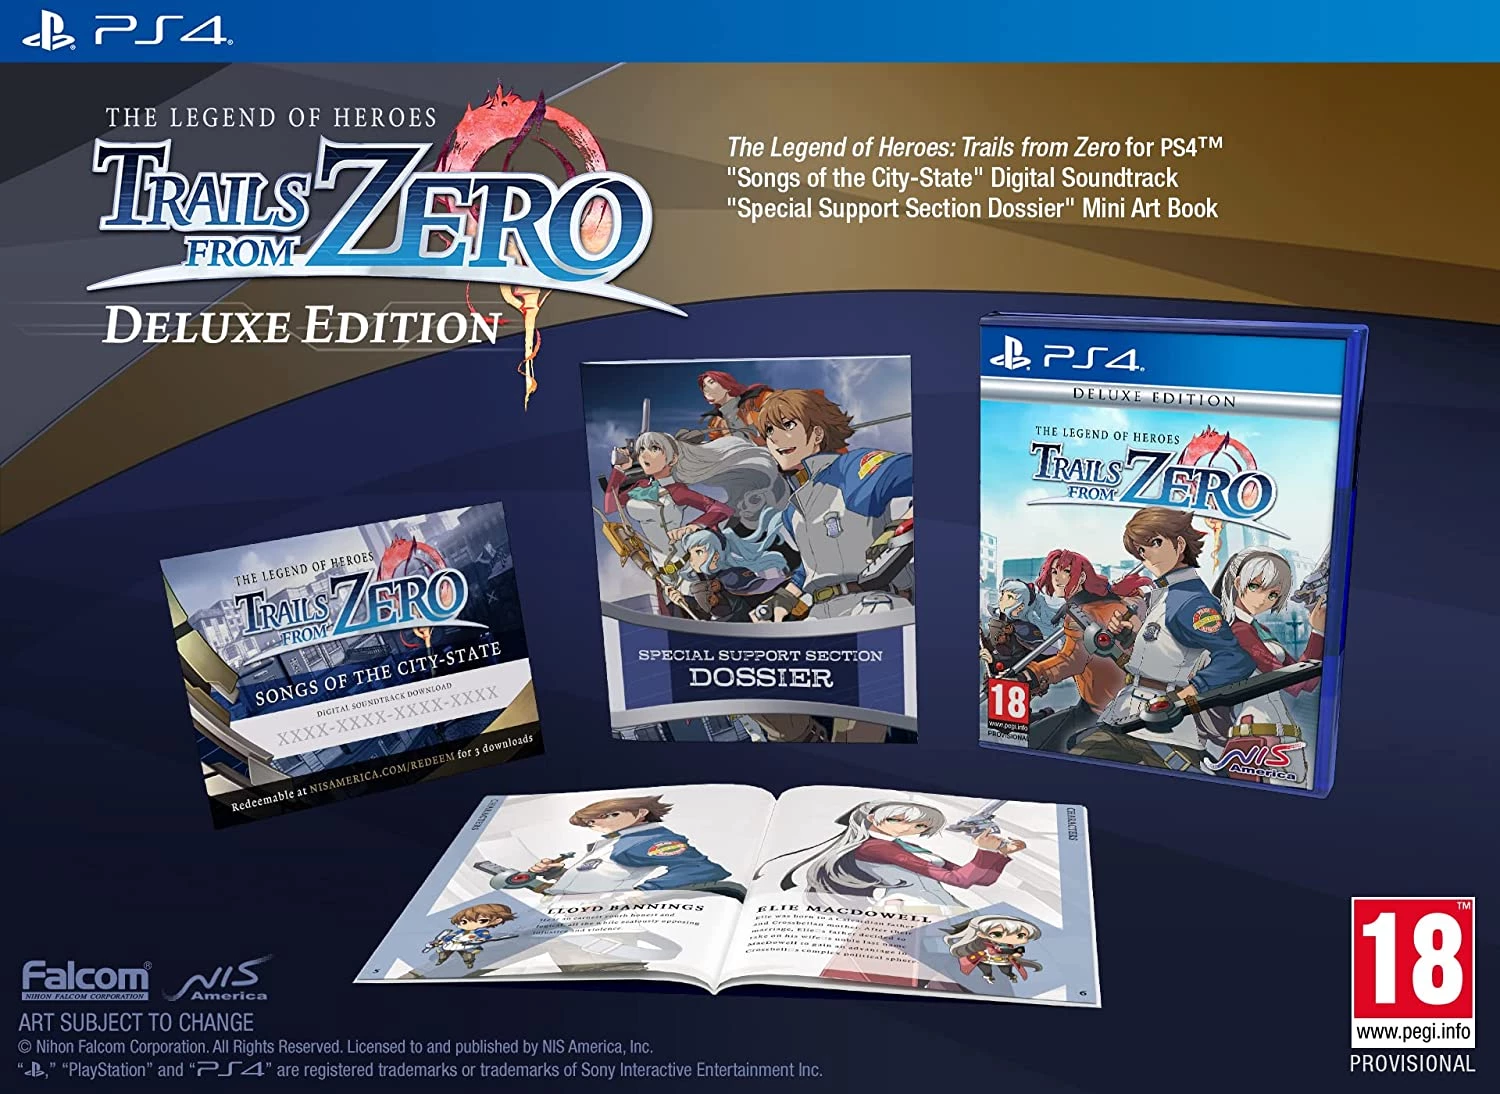 The Legend of Heroes: Trails from Zero - Deluxe Edition (PS4), NIS America